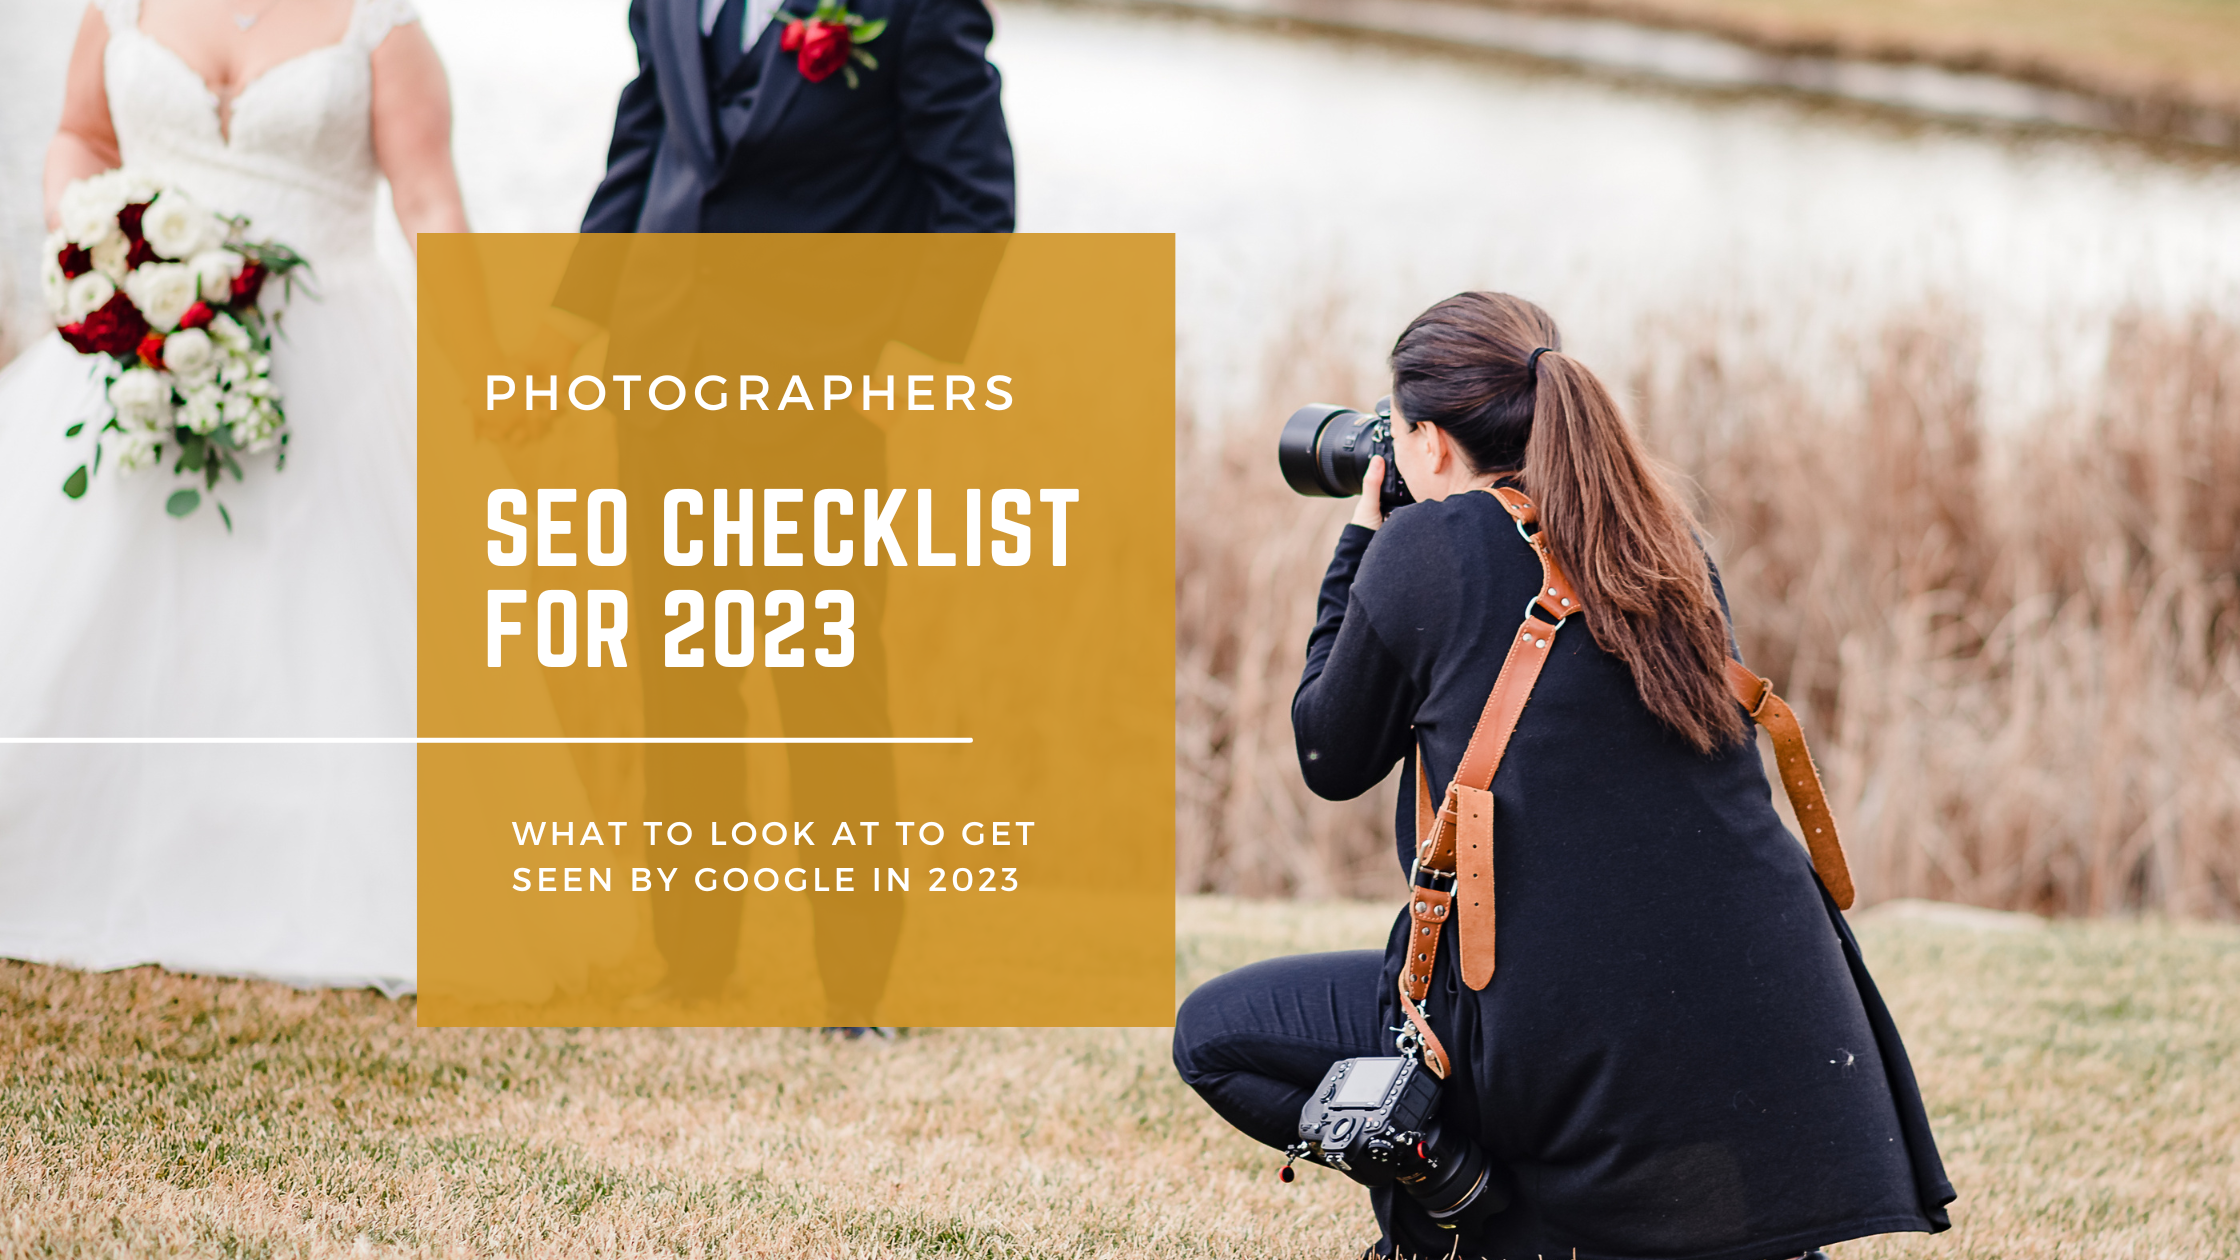 SEO Checklist for Photographers in 2023